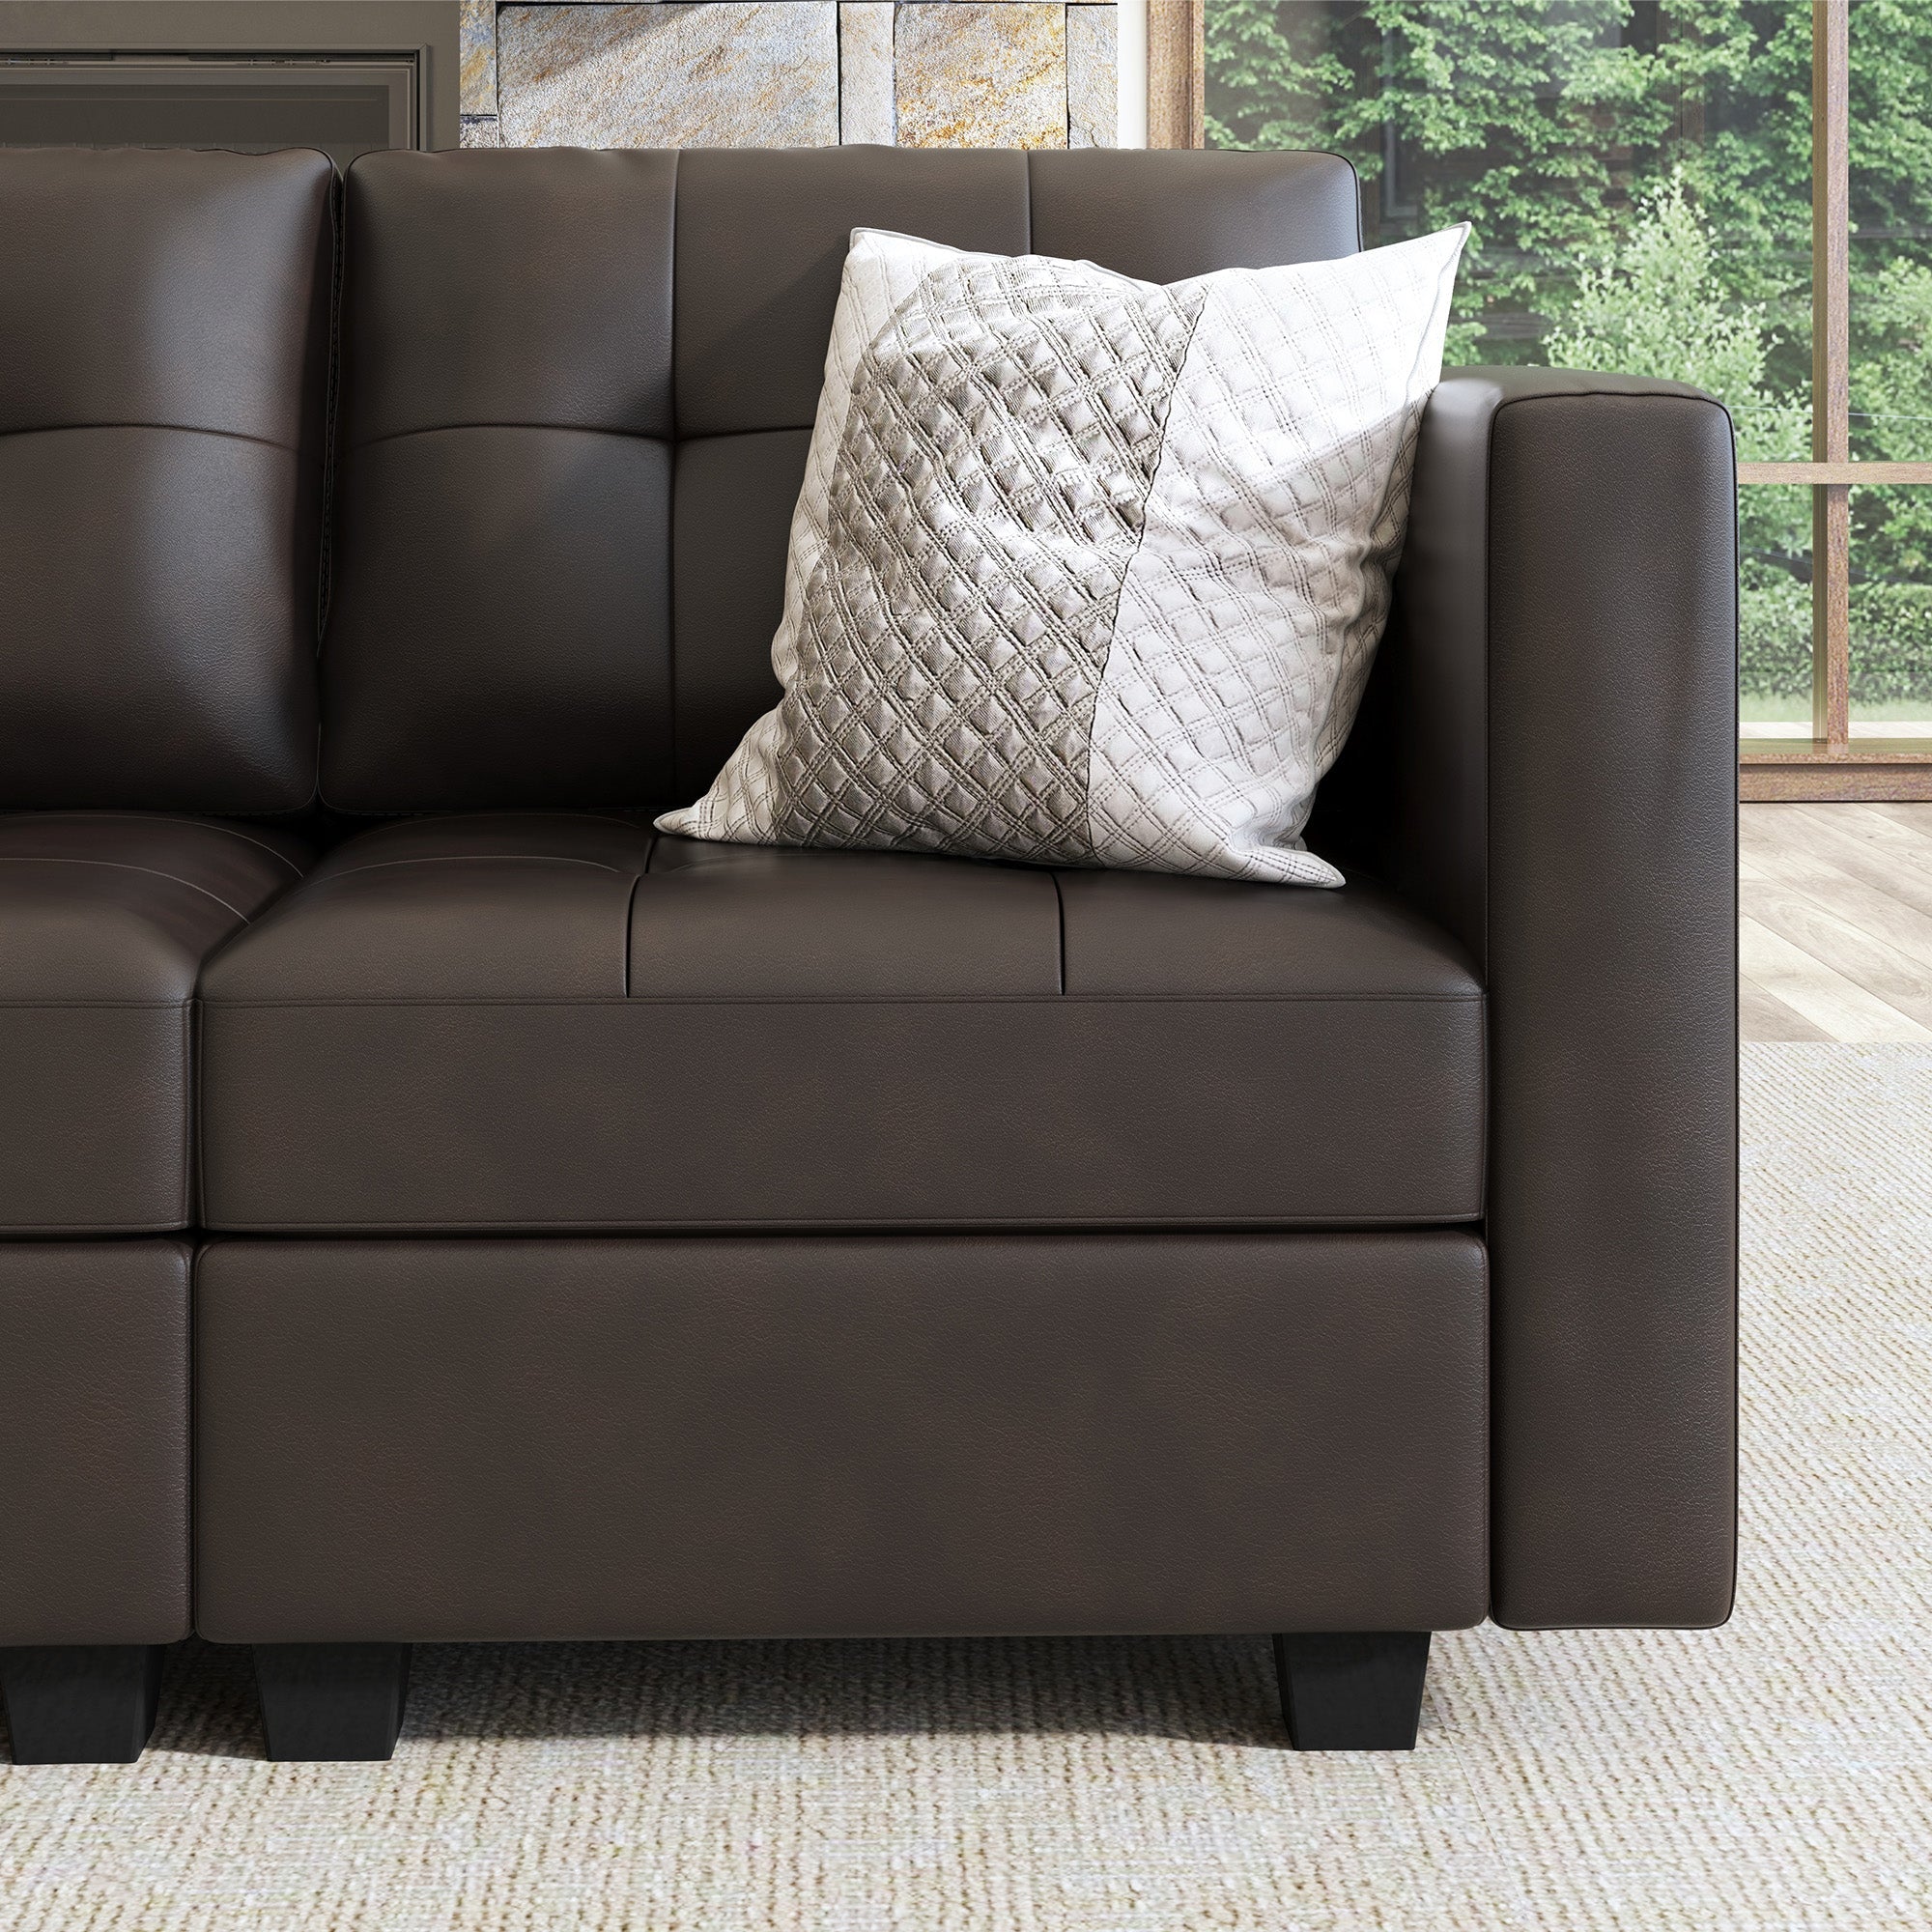 HONBAY 22-Piece Faux Leather Modular Sleeper Sectional With Storage Seat